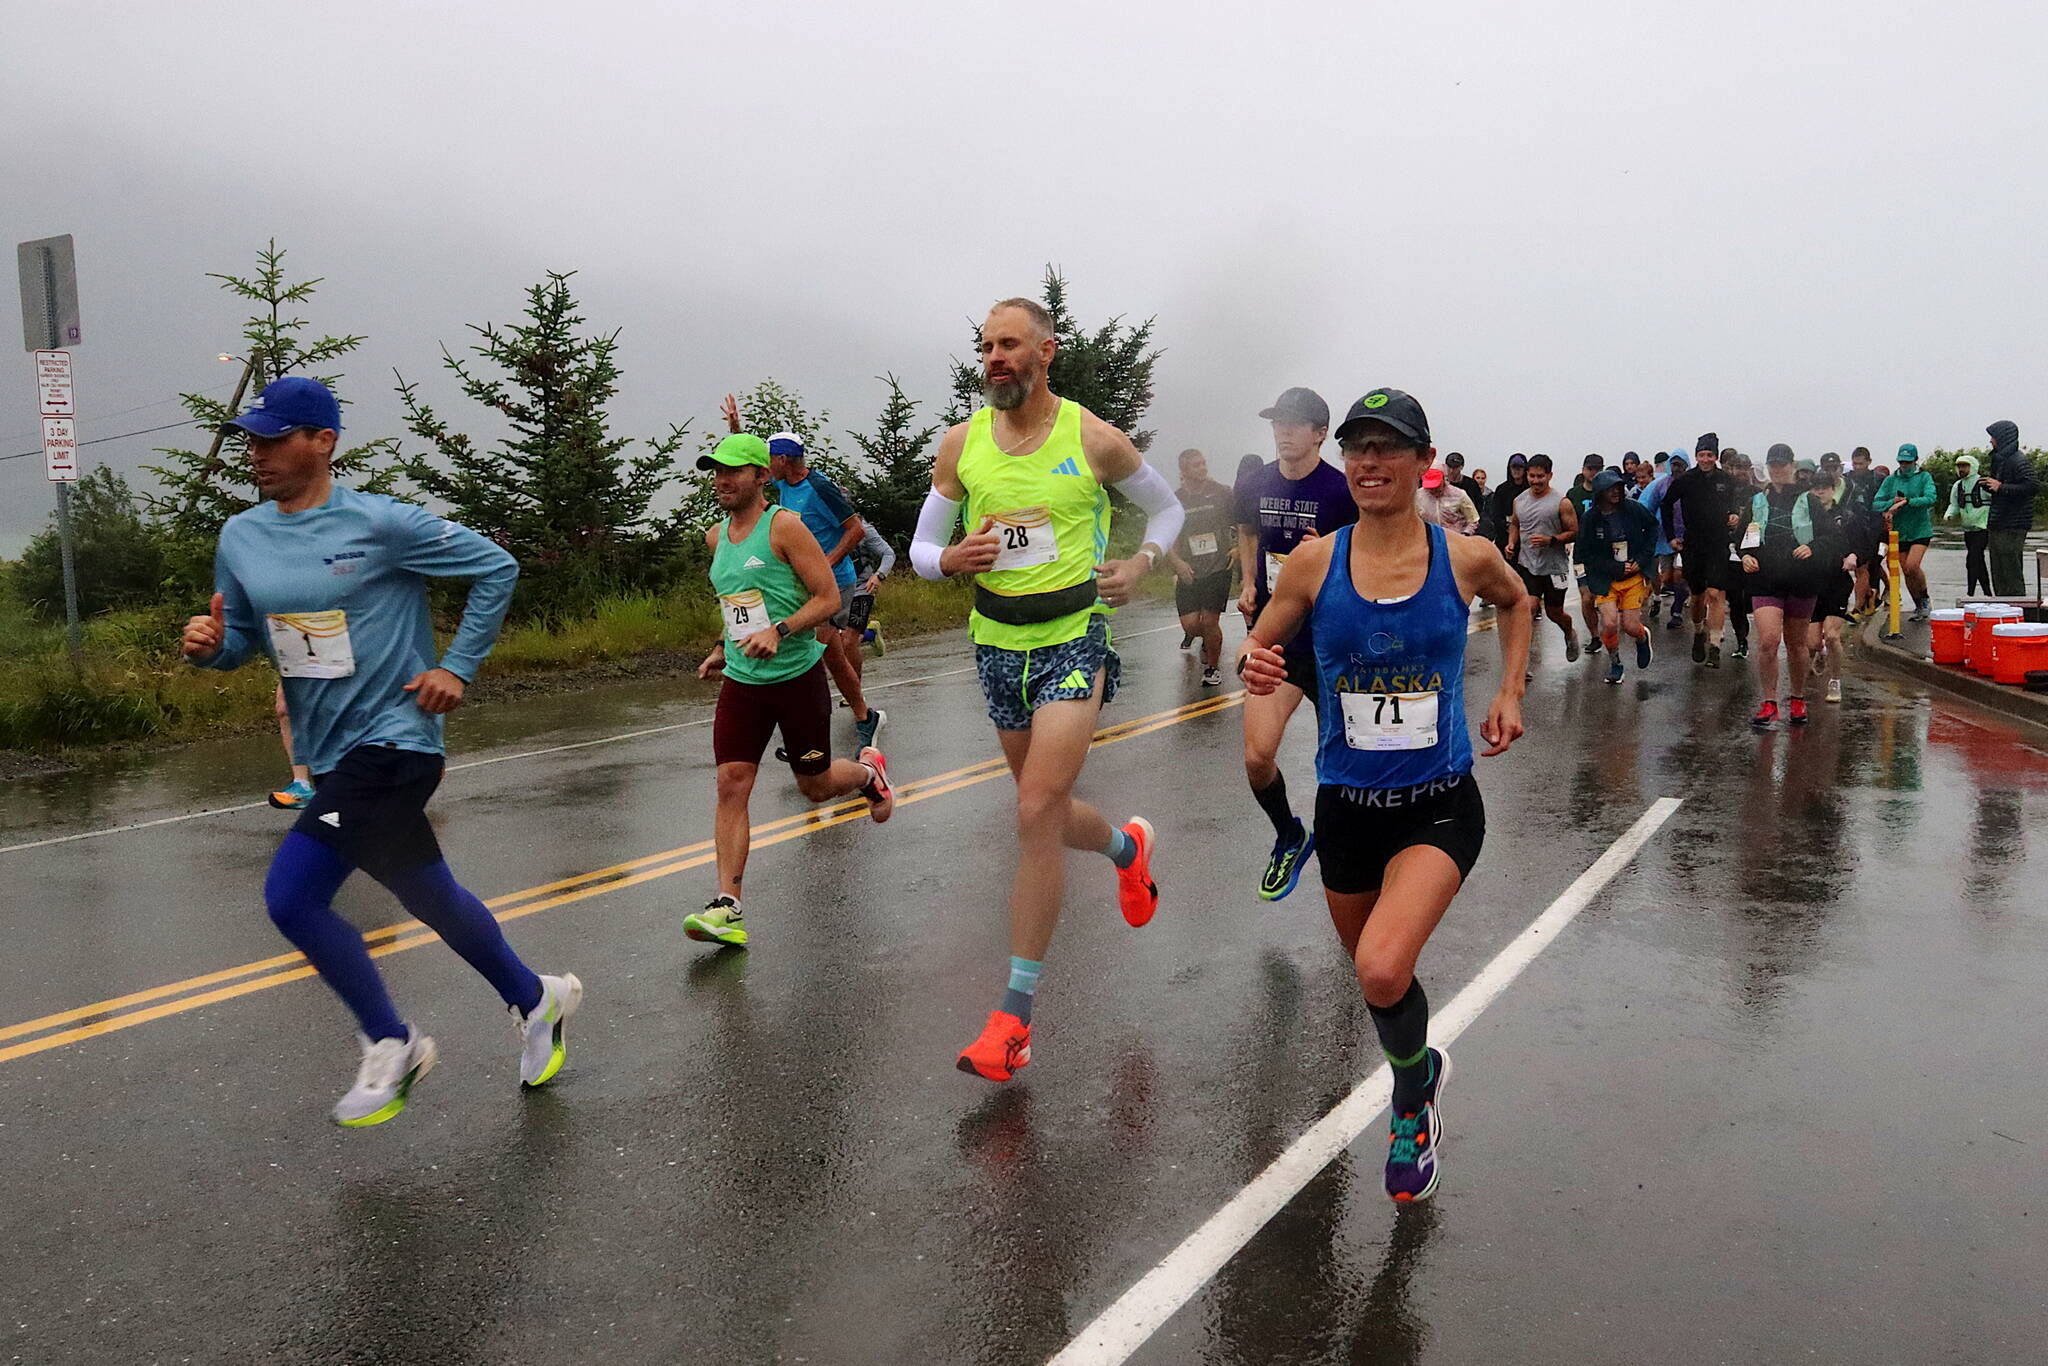 Runners begin the 26.2-mile Juneau Marathon at Savikko Park on Saturday morning. More than 85 people registered for the full-length race, a record for the annual event that originated in 1992, but about 20 of them failed to show up for what turned out to be a rainy run. (Mark Sabbatini / Juneau Empire)